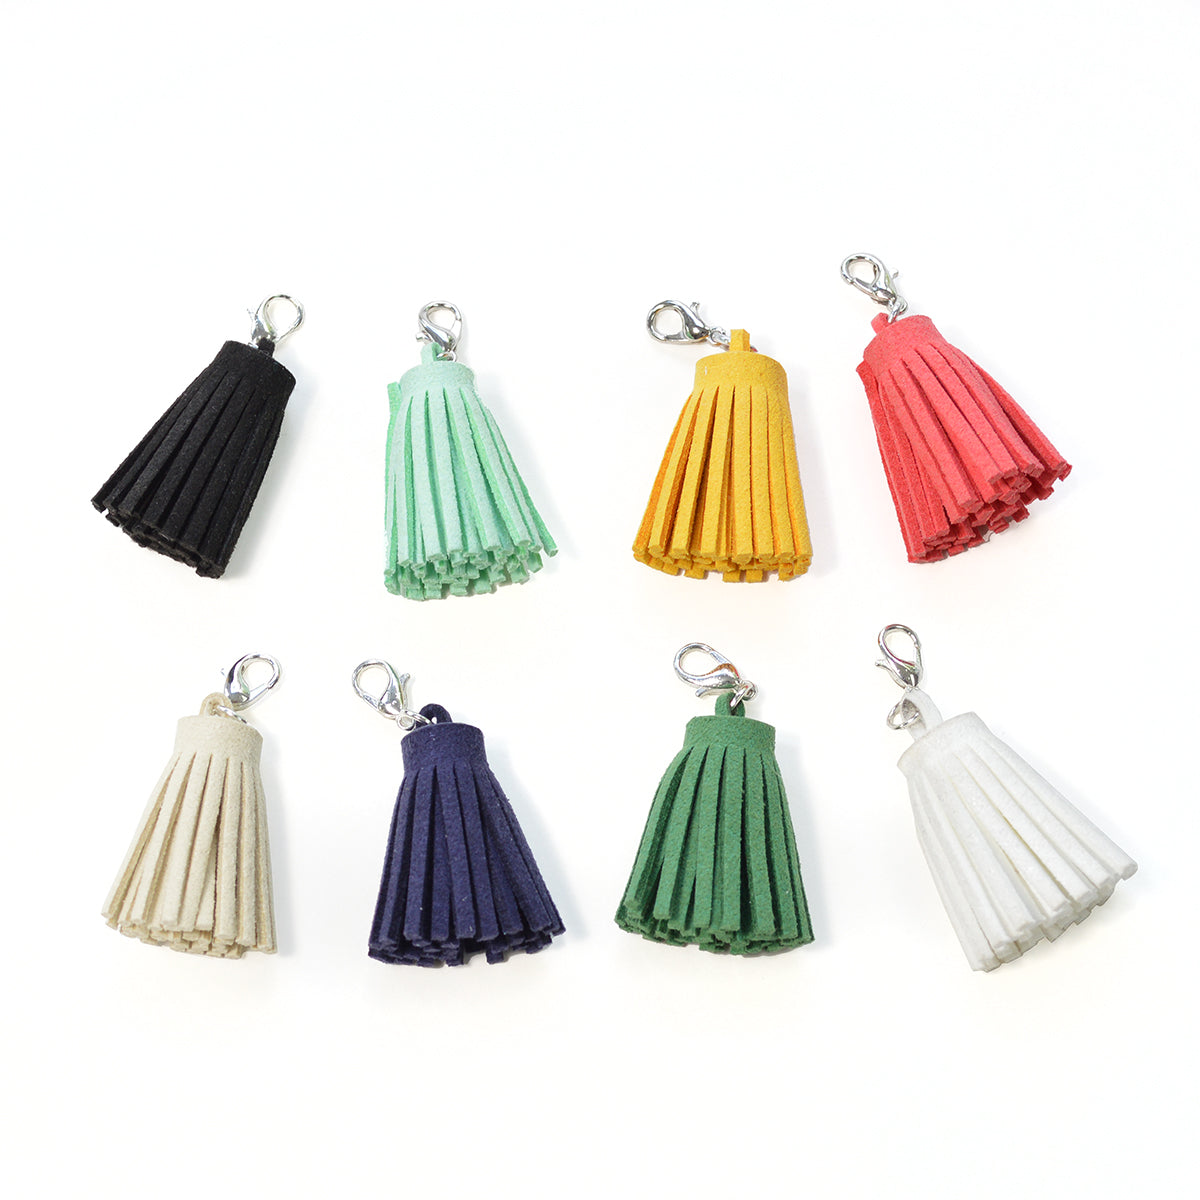 JUST IN! Limited edition shoe tassels (2pc)